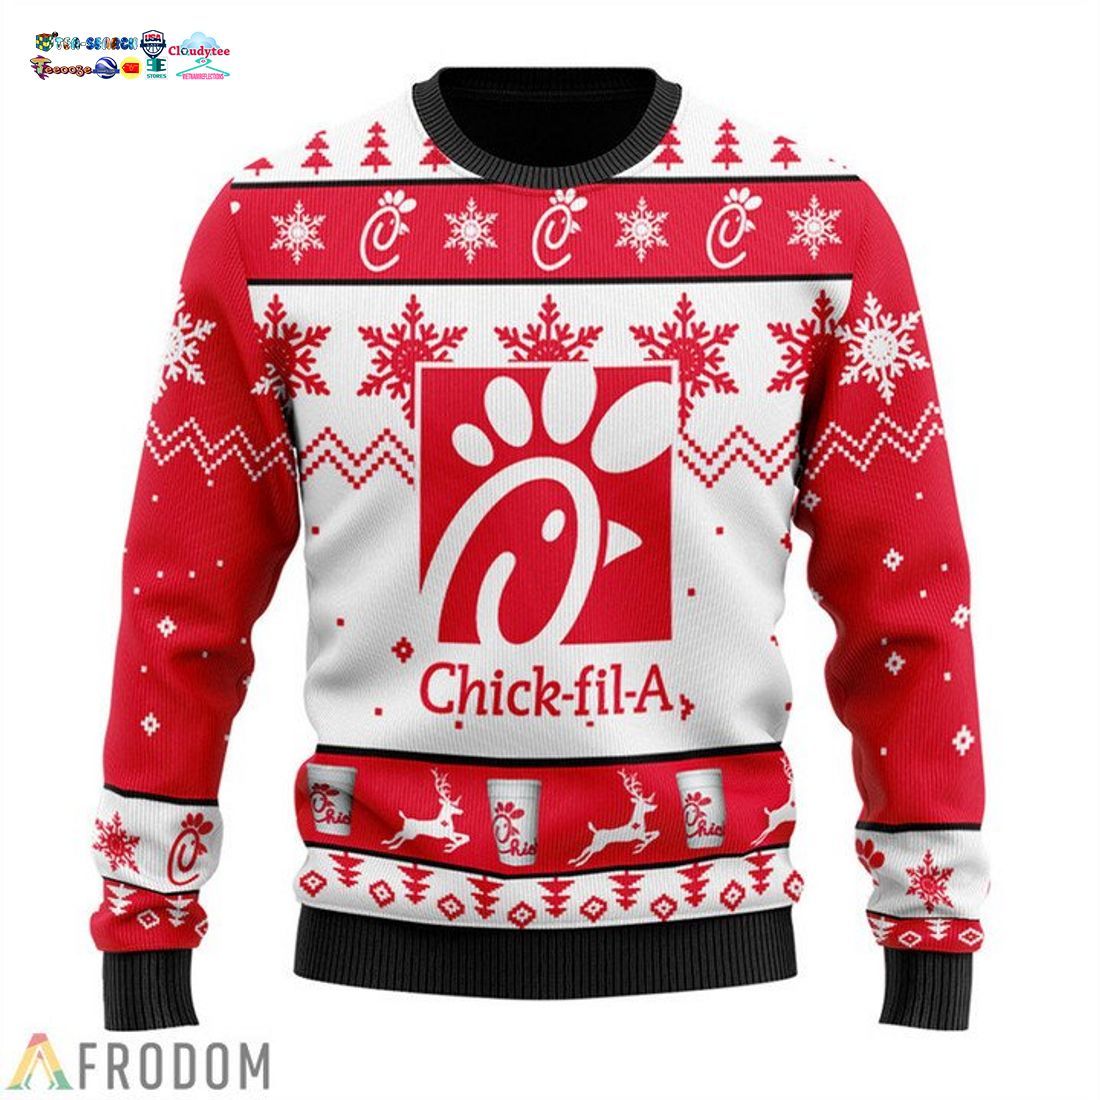 Personalized Name Chick-Fil-A Ugly Christmas Sweater